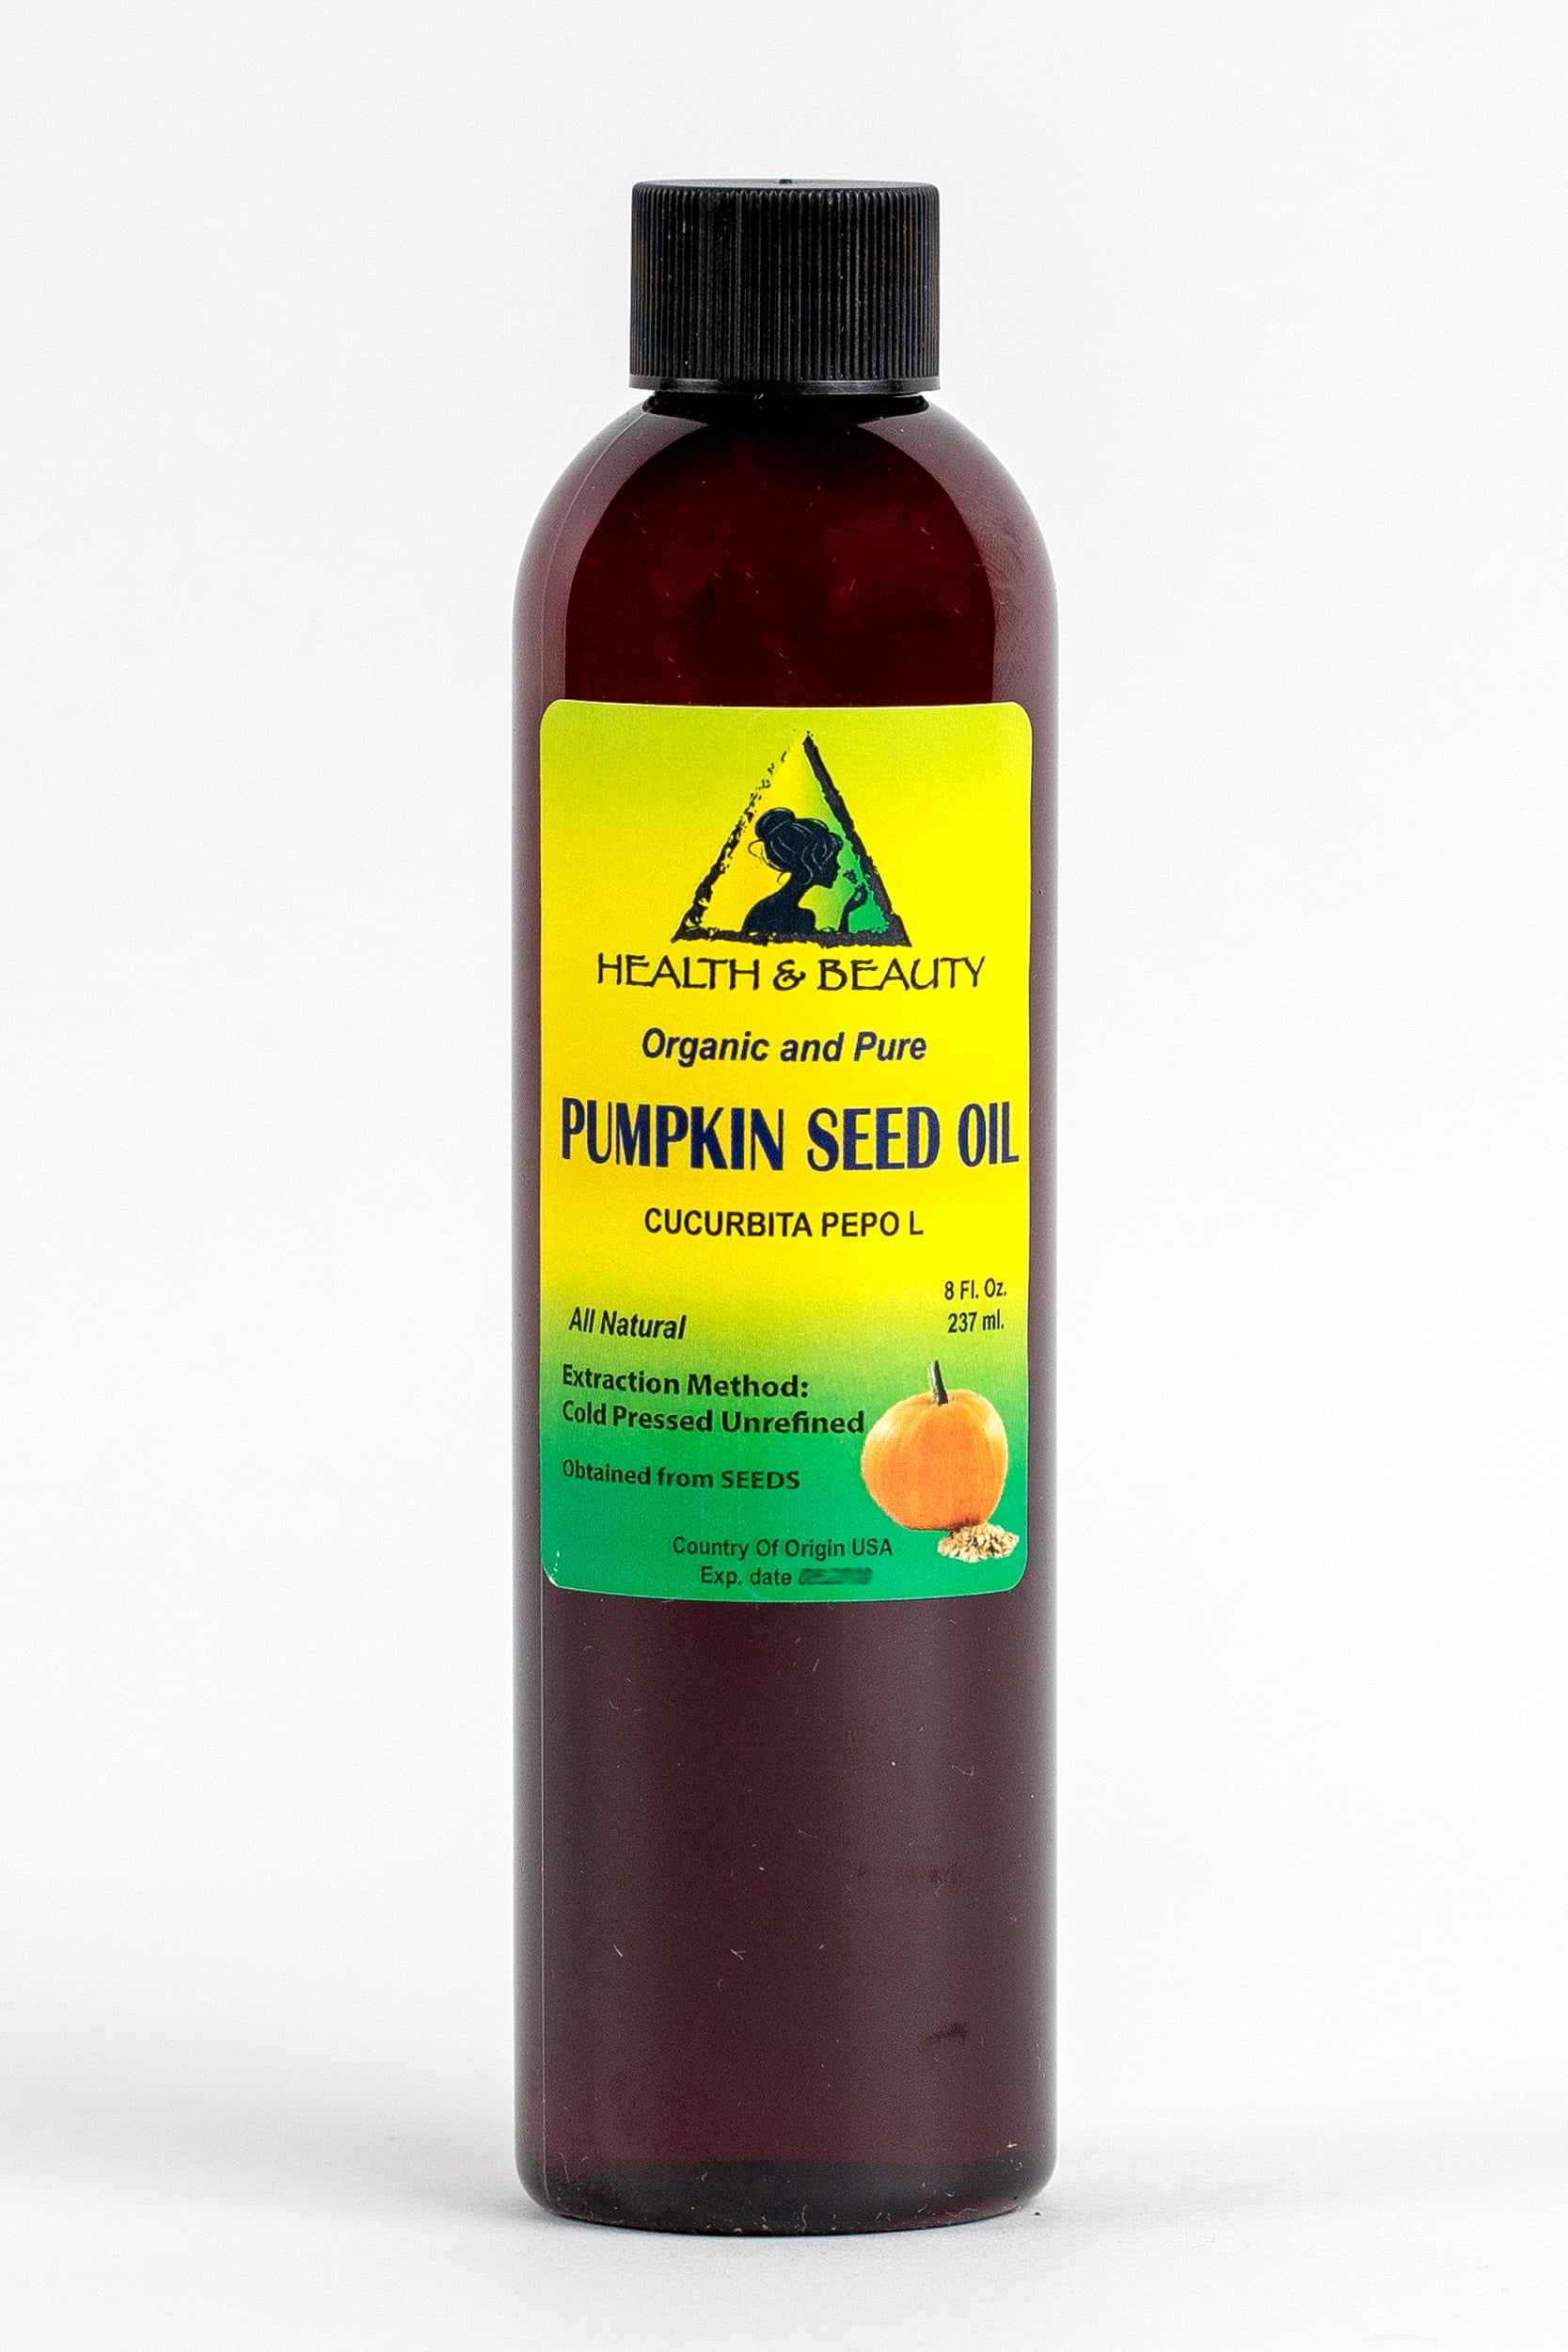 Pumpkin Seed Shea and Mineral Lotion – Soulful Earth Herbals